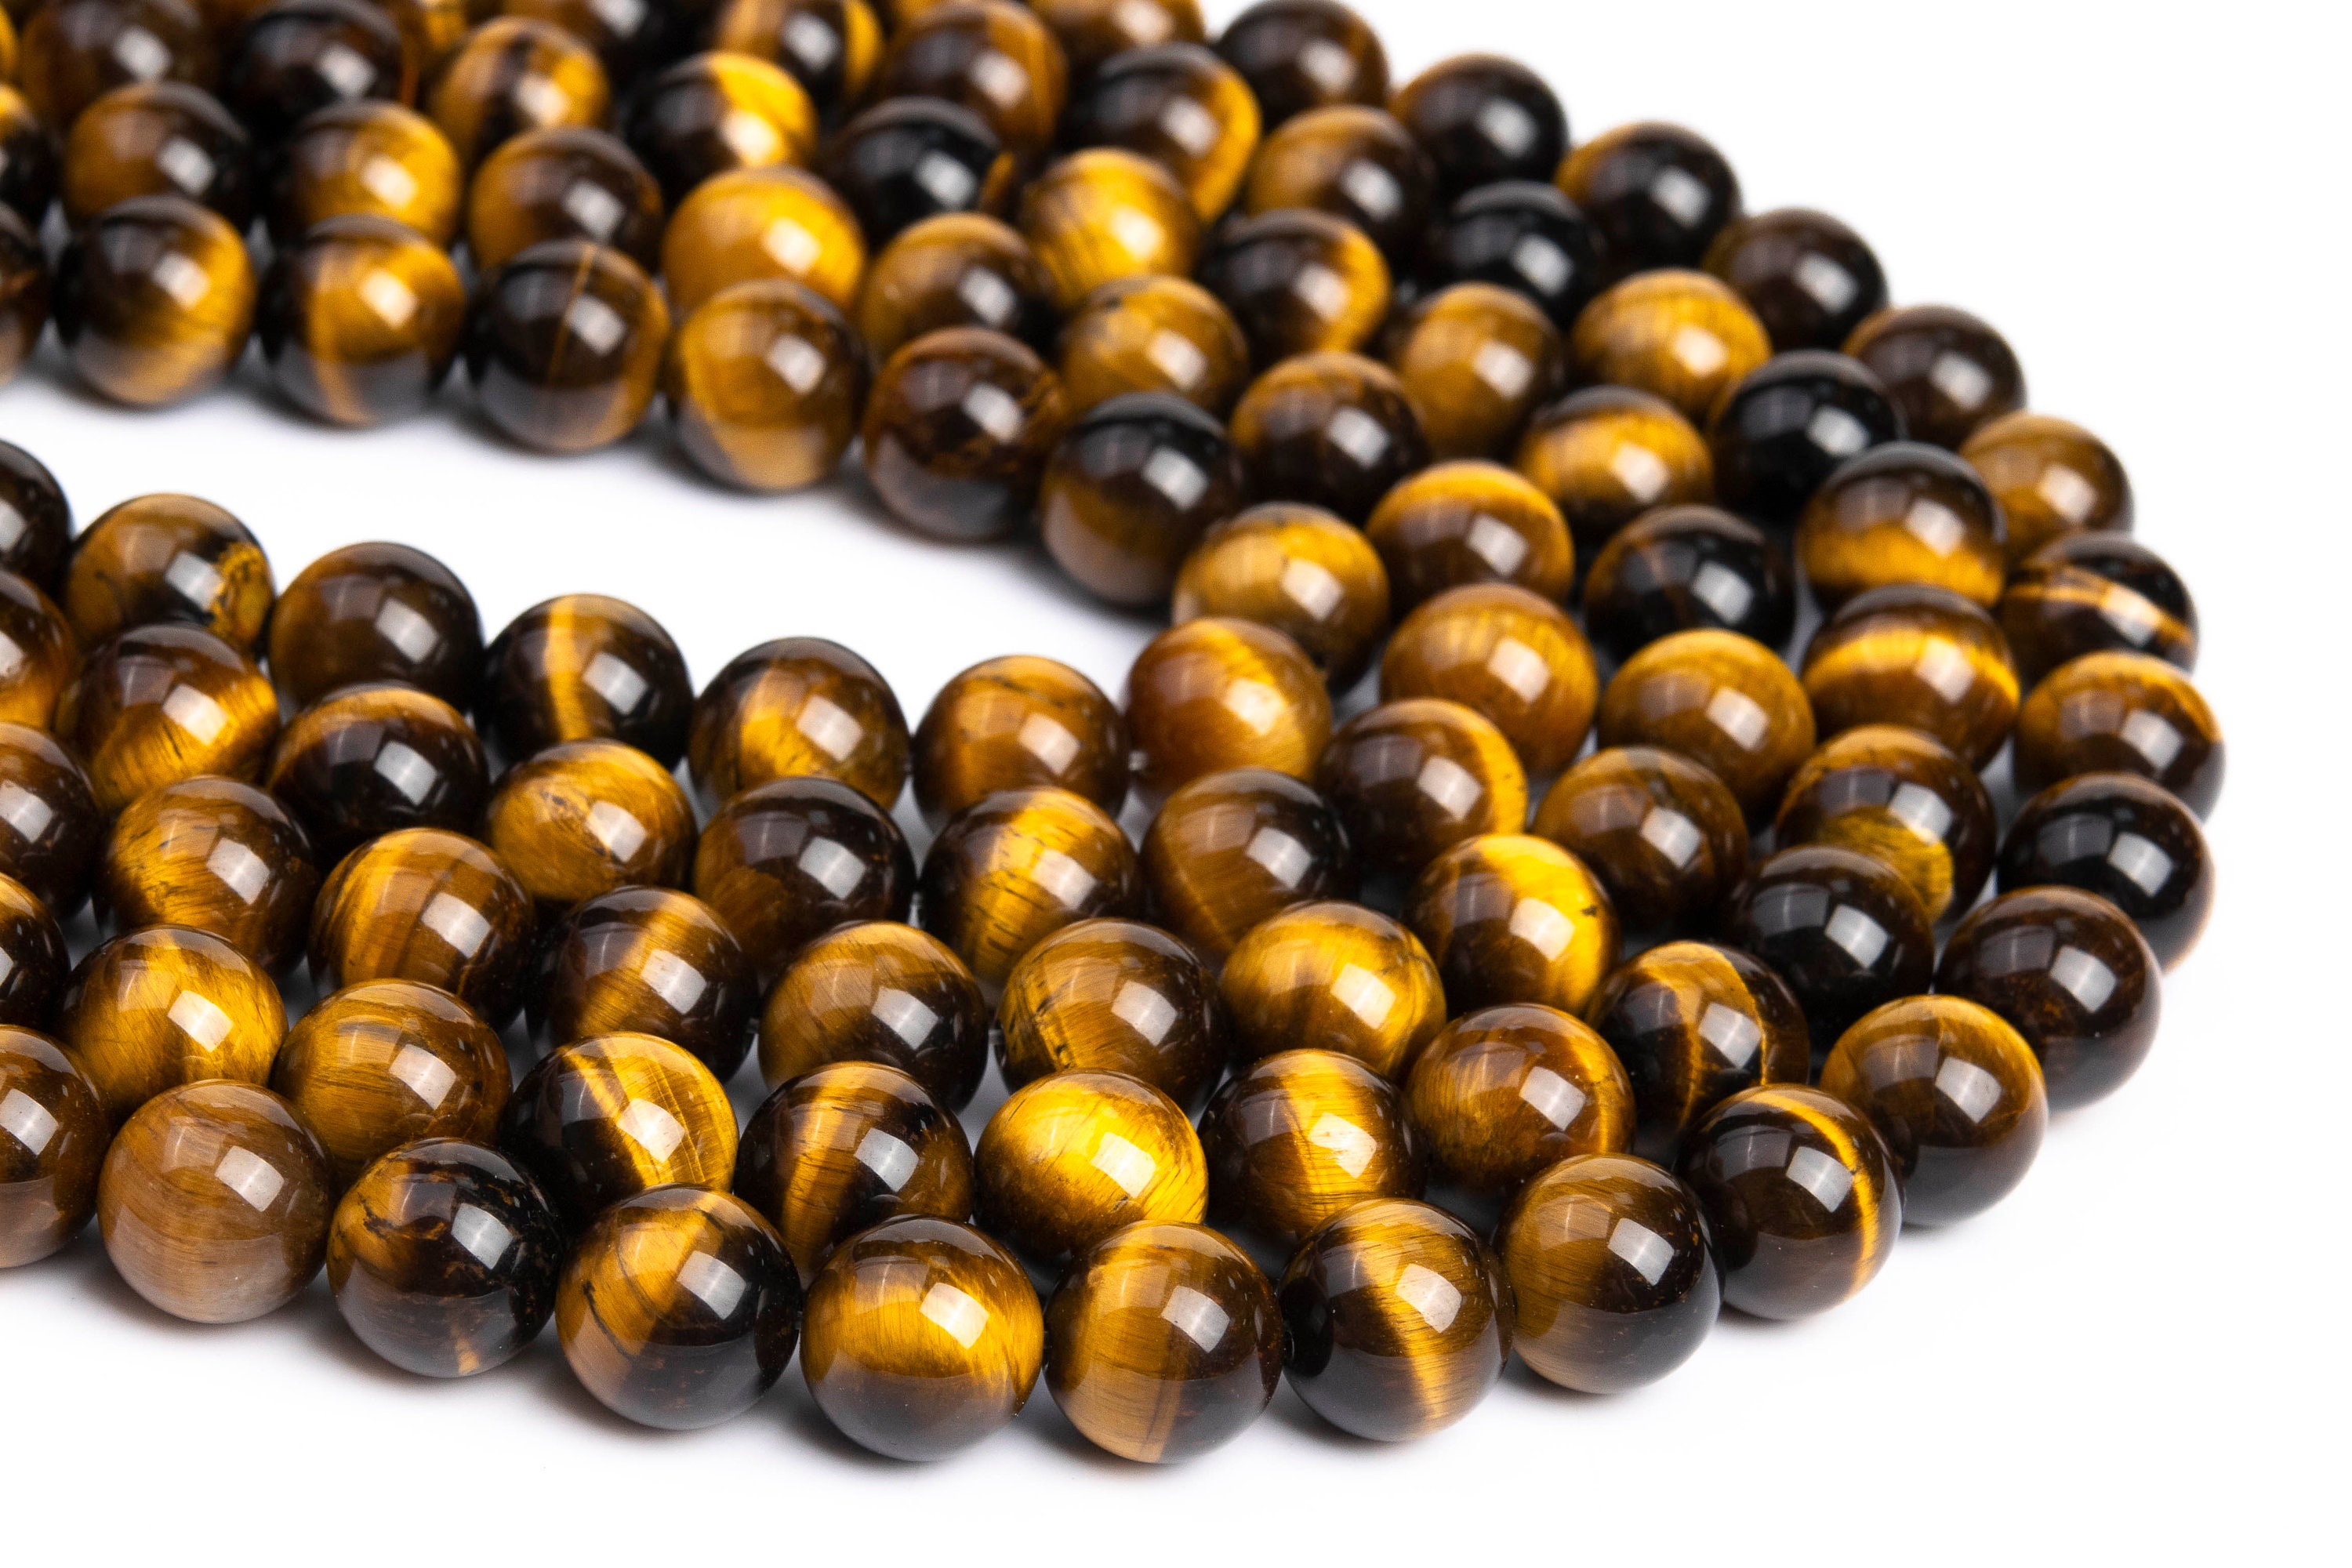 Qiwan 45pcs 8mm Yellow Tiger Eye A Grade Gemstone Loose Beads Natural Round Crystal Energy Stone Healing Power for Jewelry Making